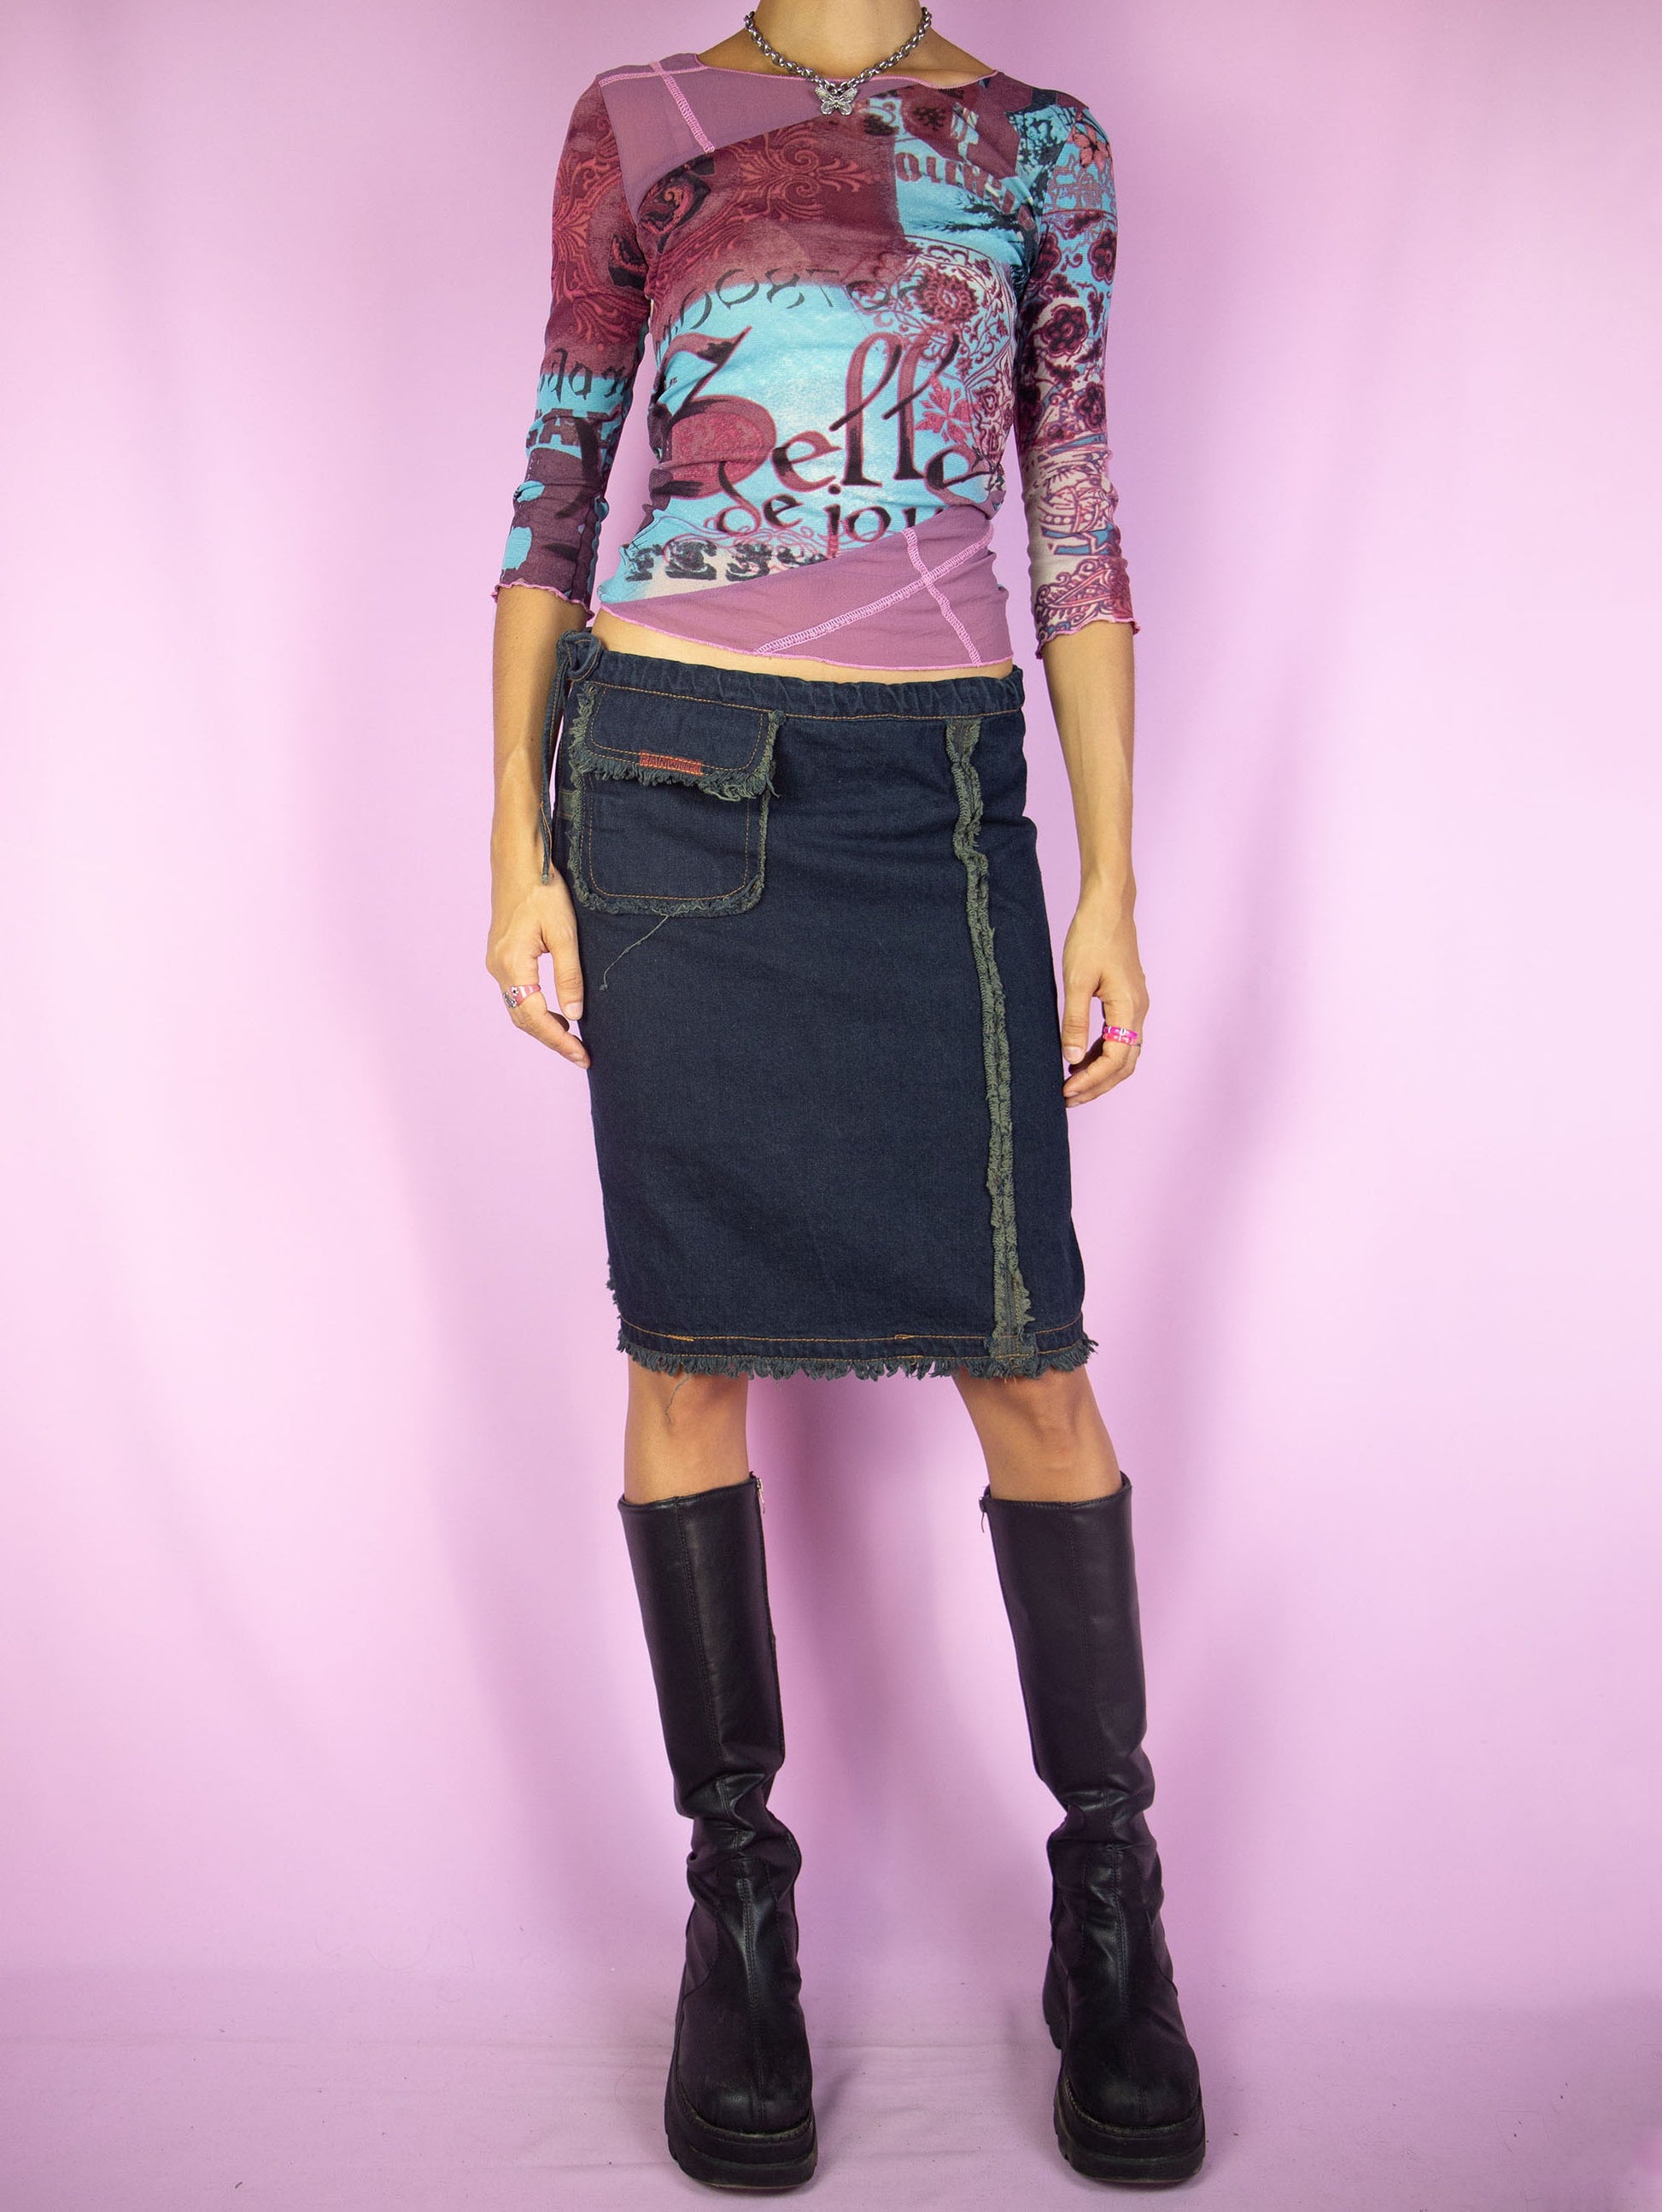 The Y2K Asymmetric Denim Mini Skirt is a vintage dark denim navy blue skirt tied at the side with a pocket and frayed seam details. Cyber goth grunge 2000s subversive gorpcore jean skirt.